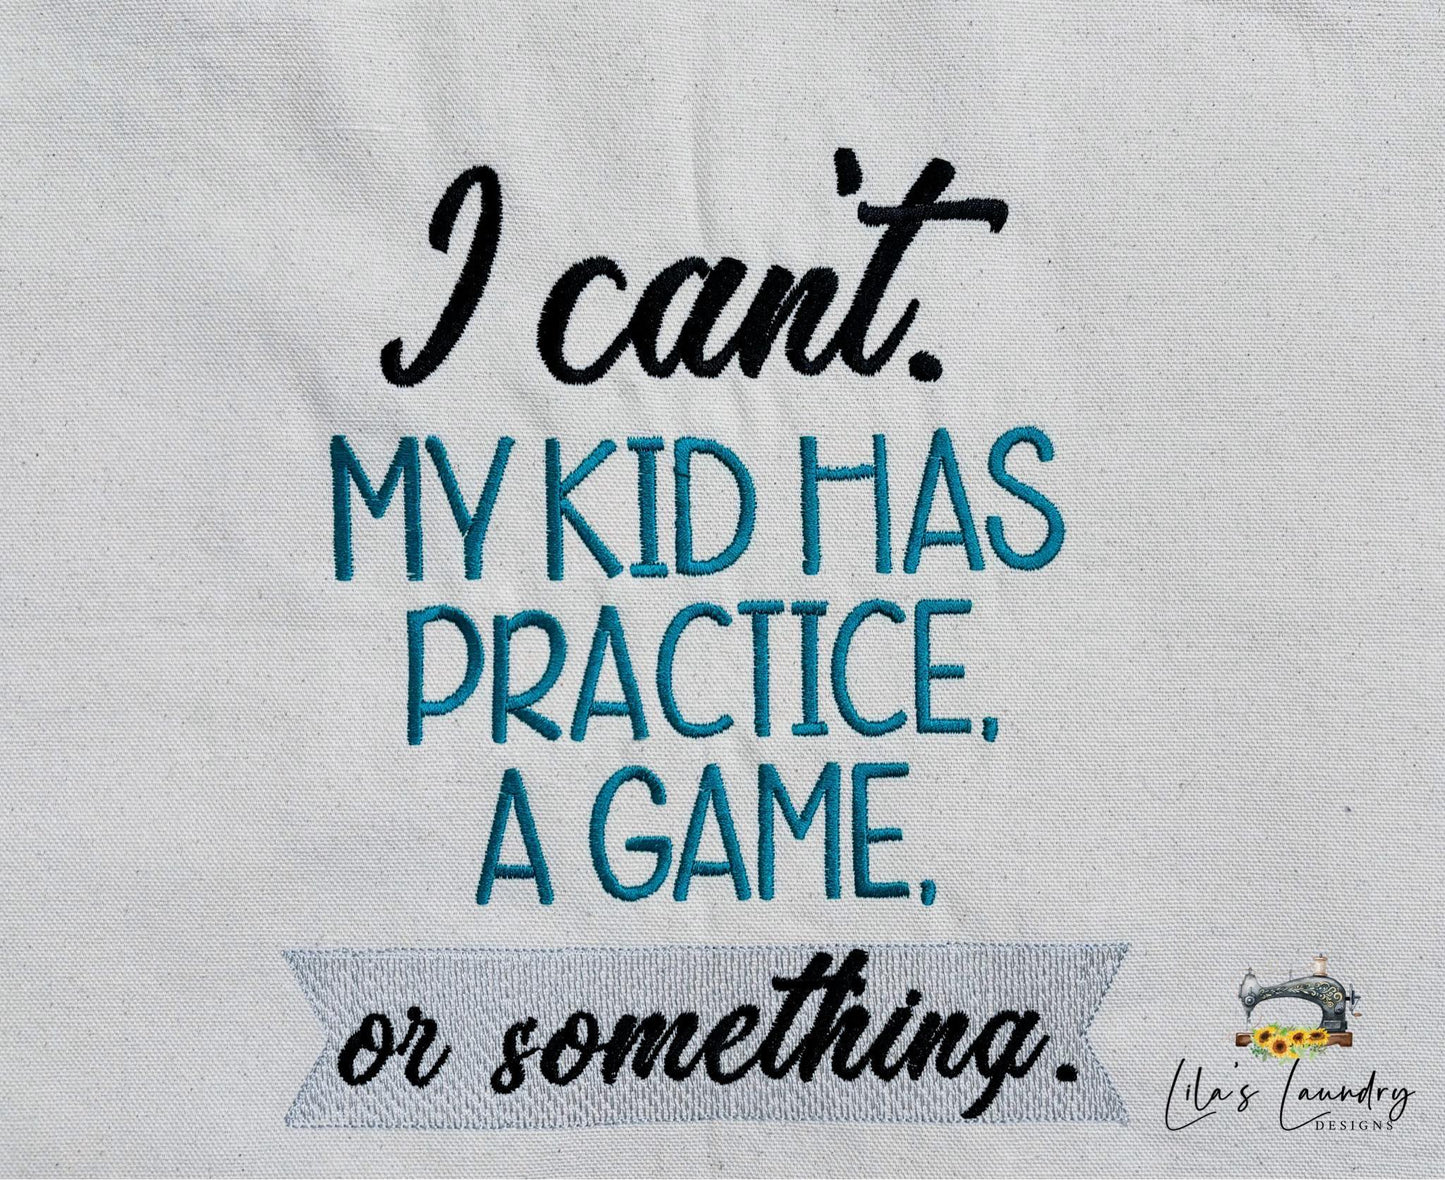 Practice Game or Someting - 4 Sizes - Digital Embroidery Design